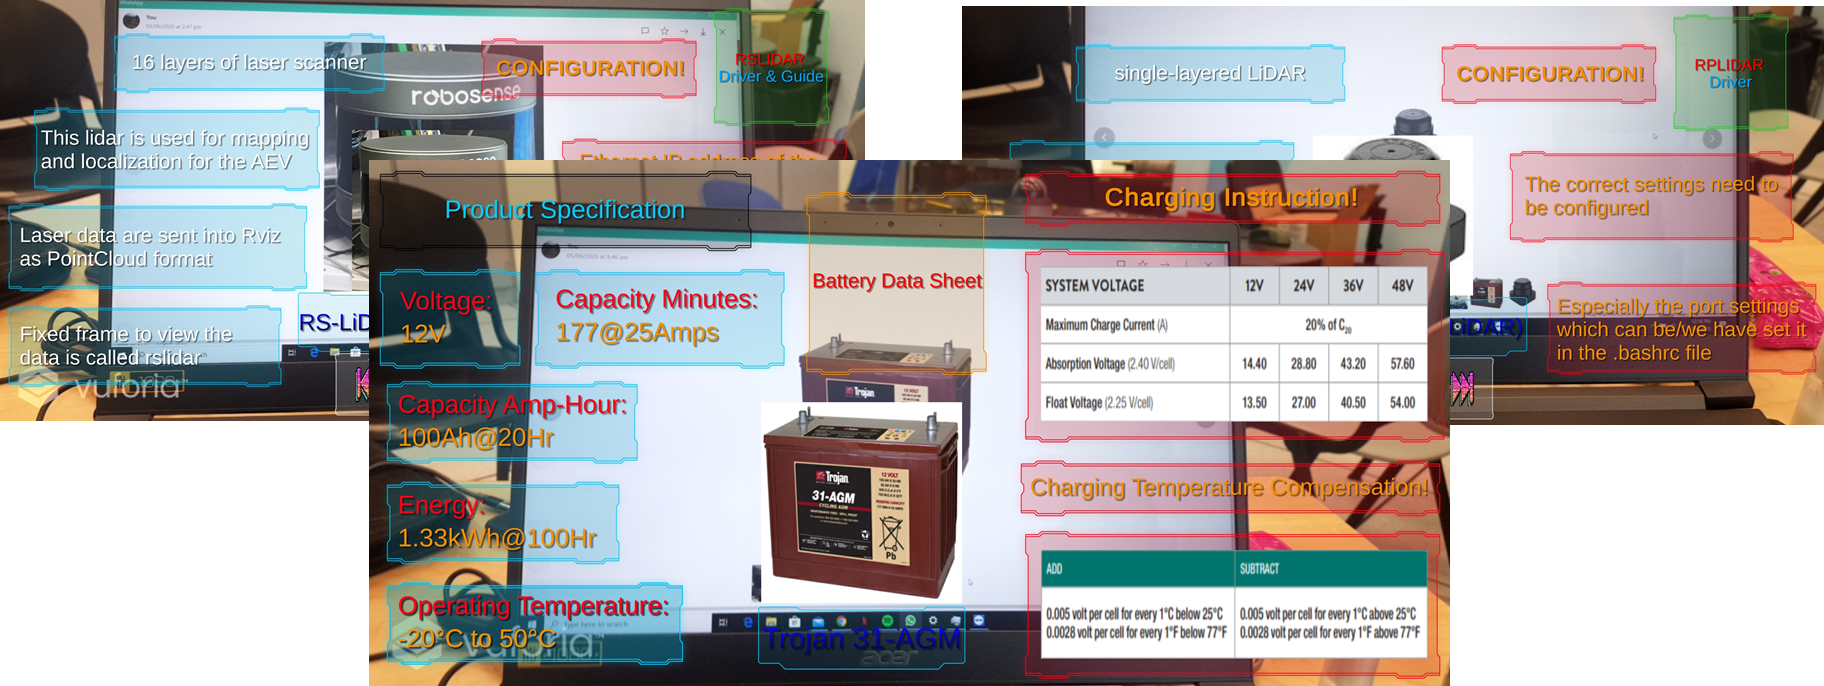 Augmented Reality Information and Troubleshooting System